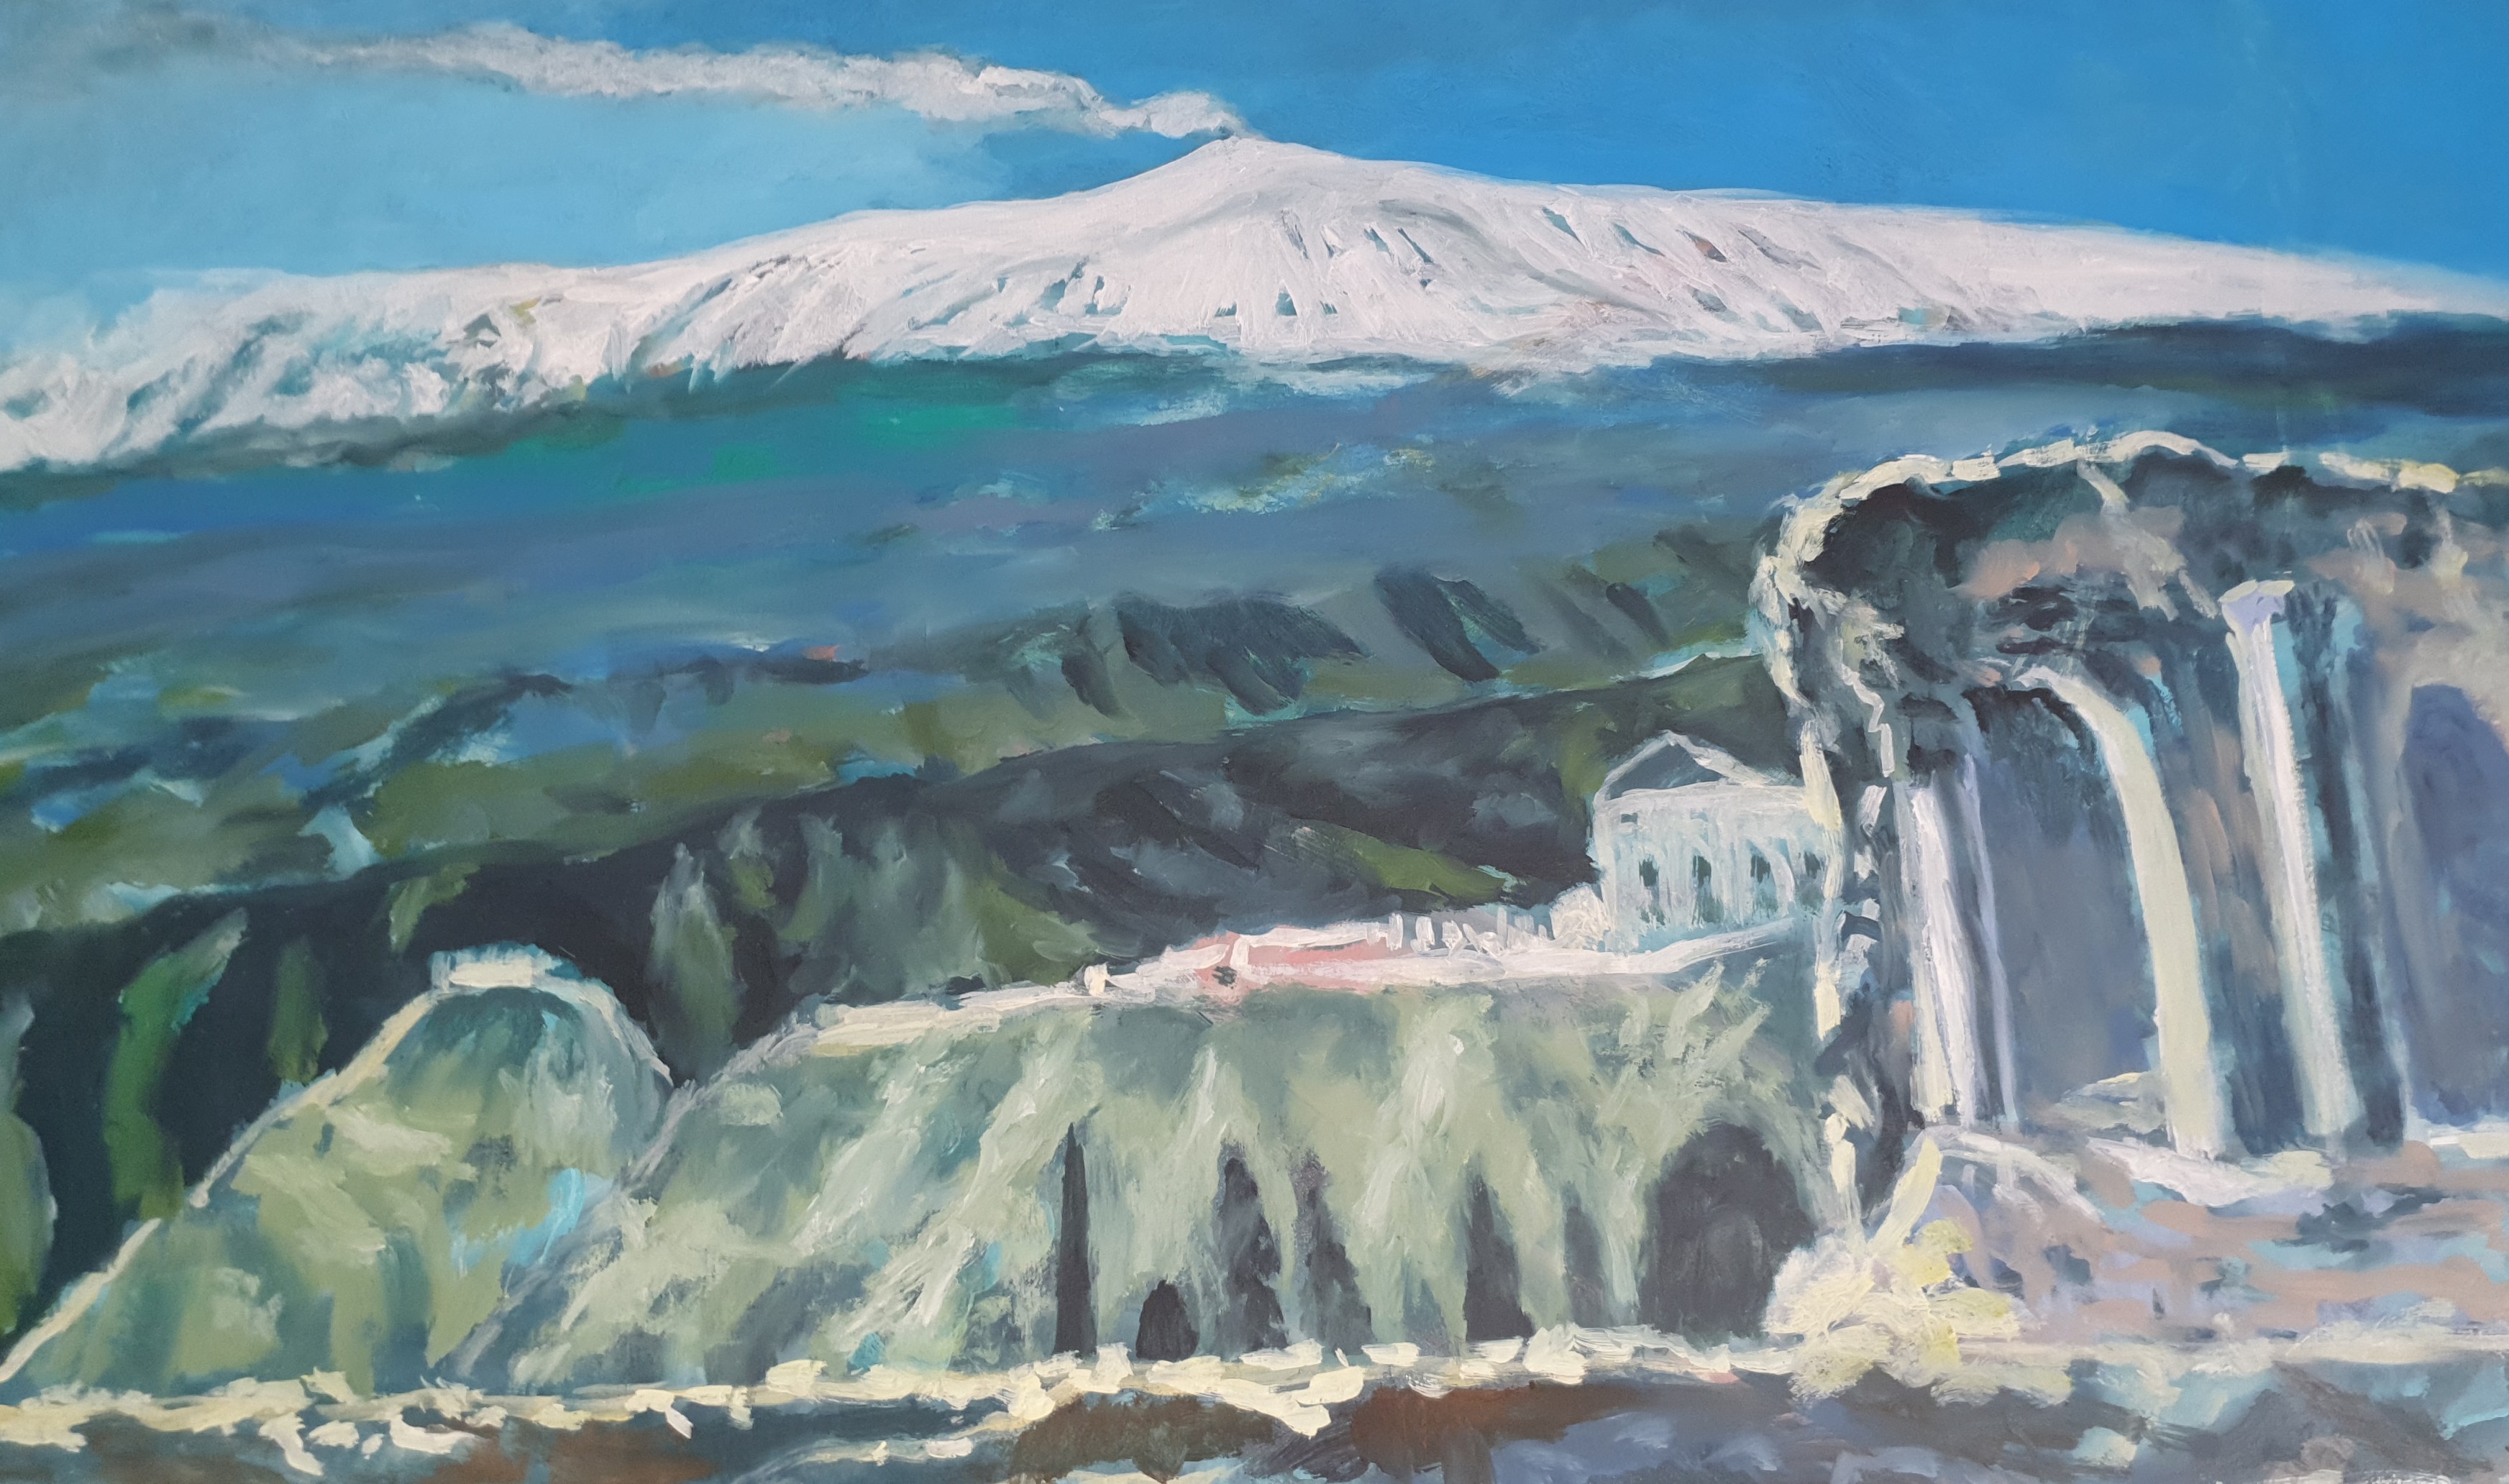 This artwork portrays Taormina's ancient Greek Theater with Mount Etna in the background. The contemporary art master lived for a while in Sicily as well.